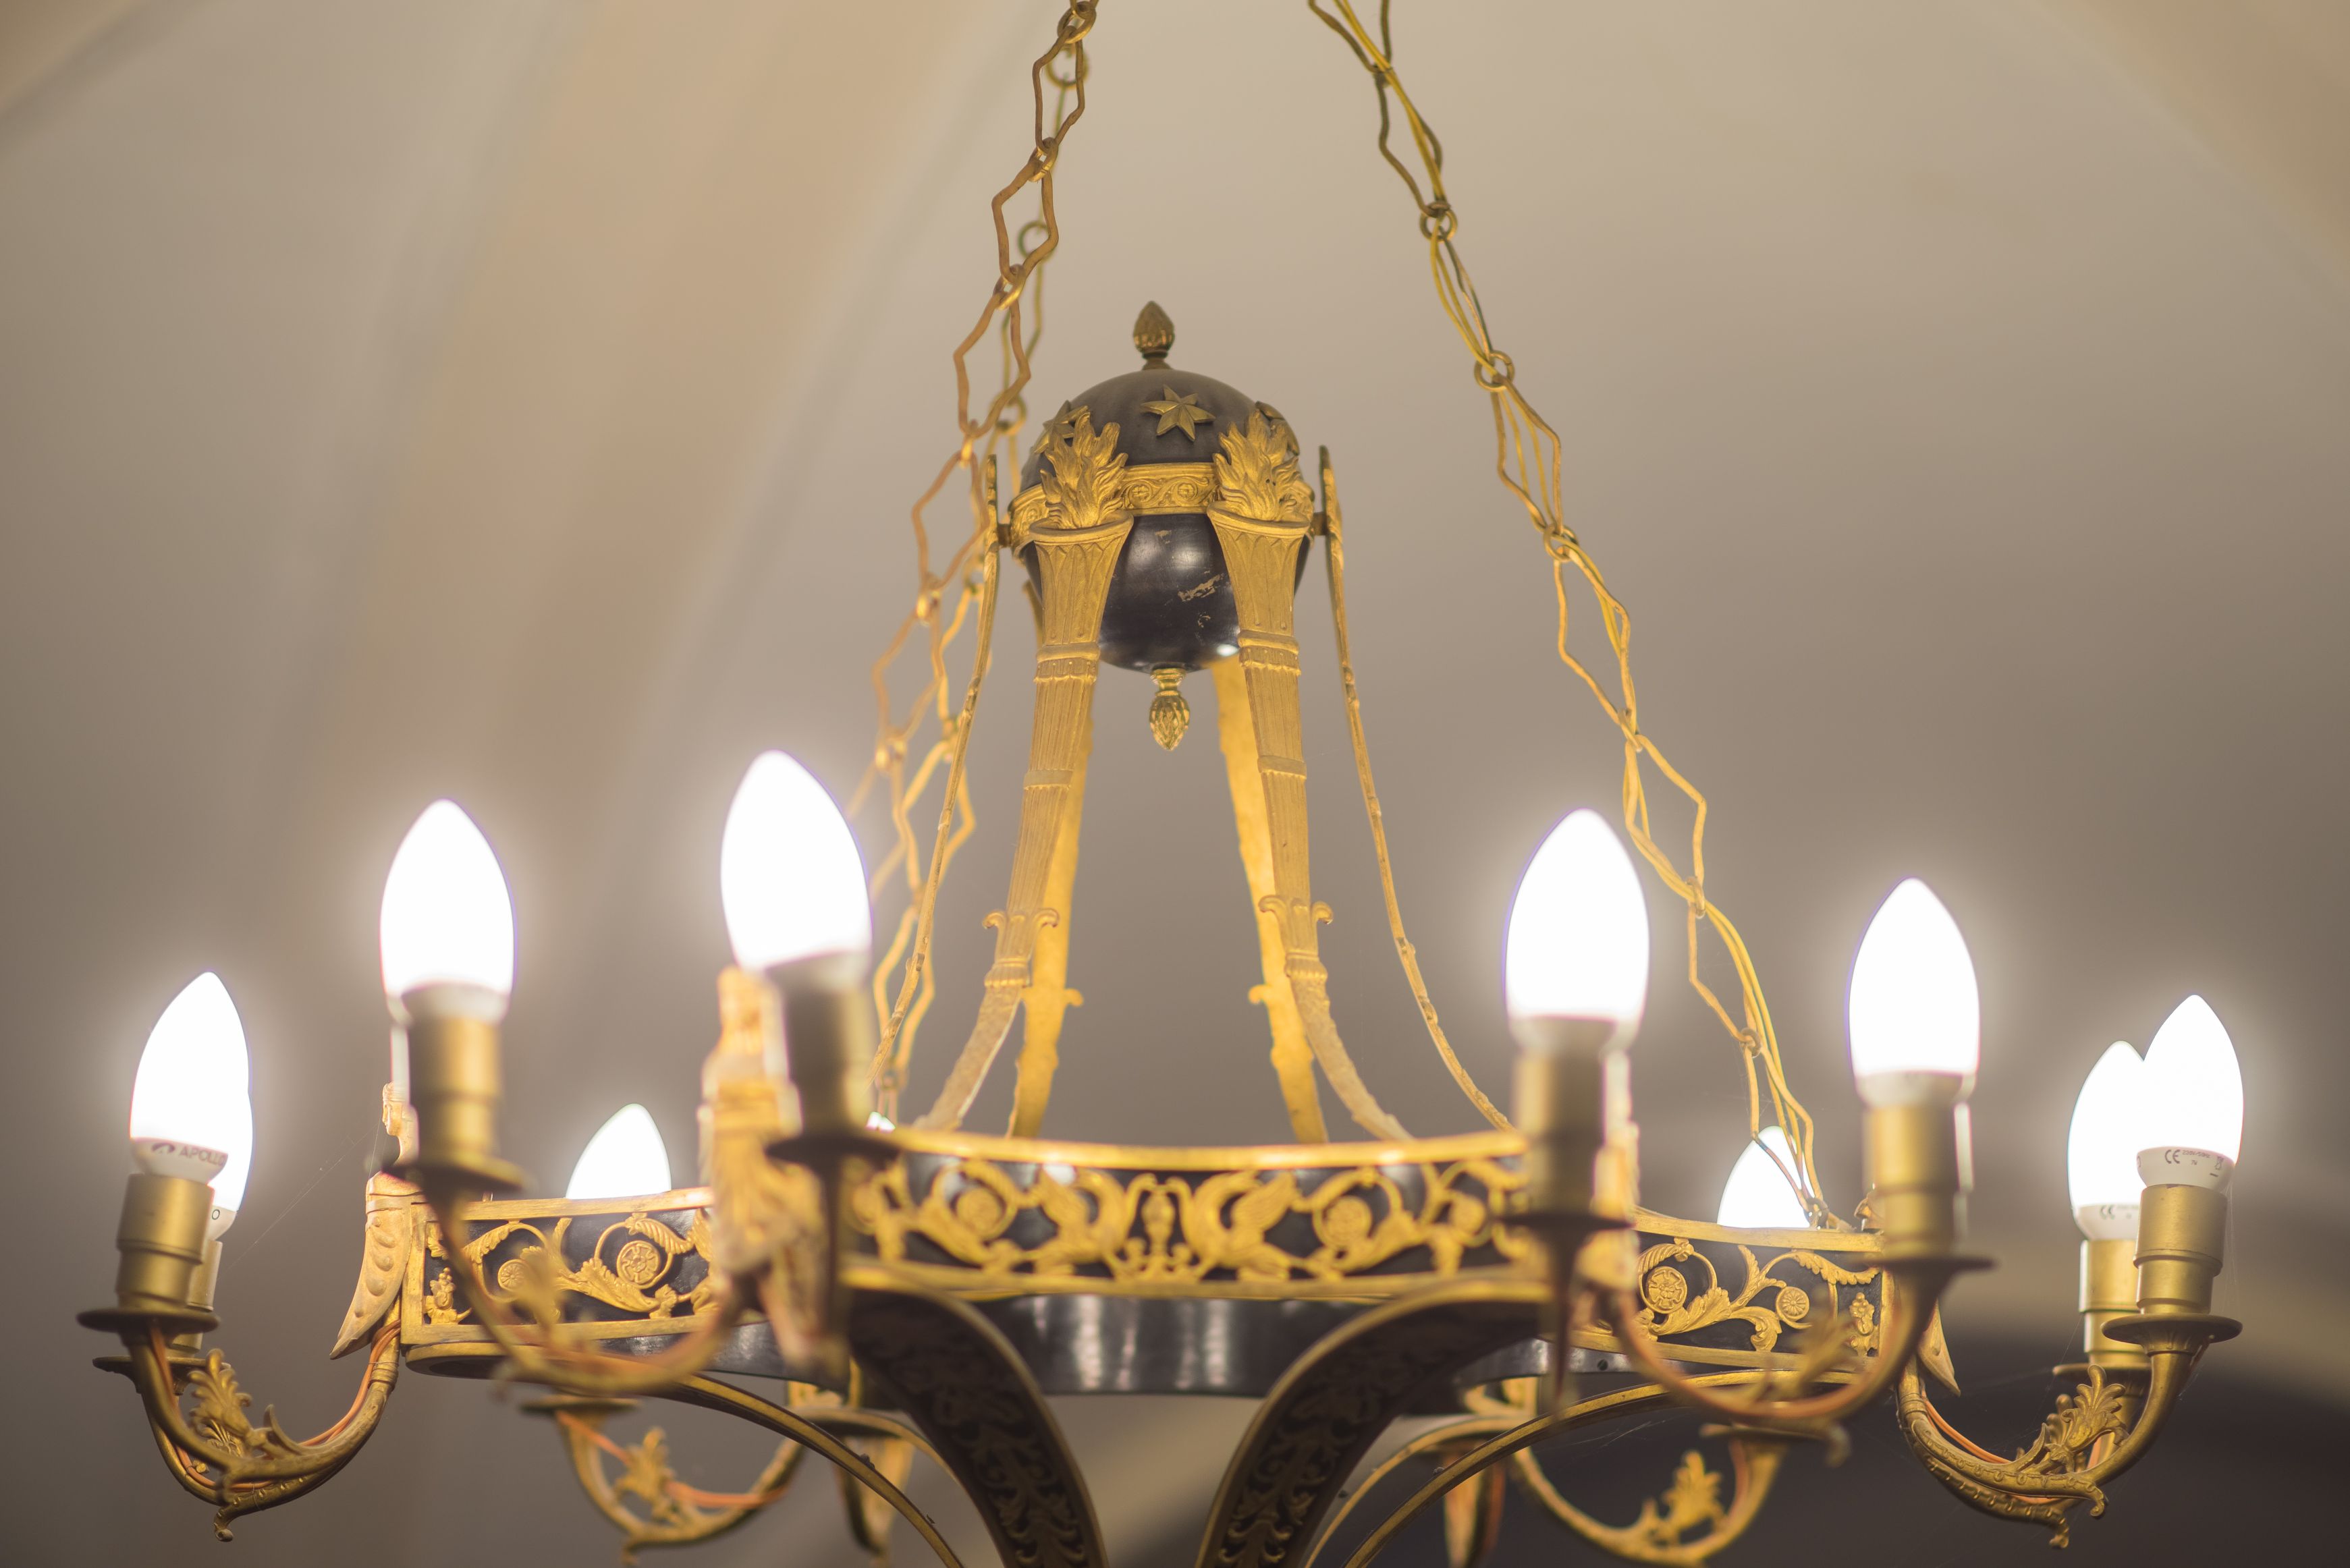 Fragment of chandelier, 1800–1849, Archdiocese of Vilnius. Photo by Povilas Jarmala, 2017